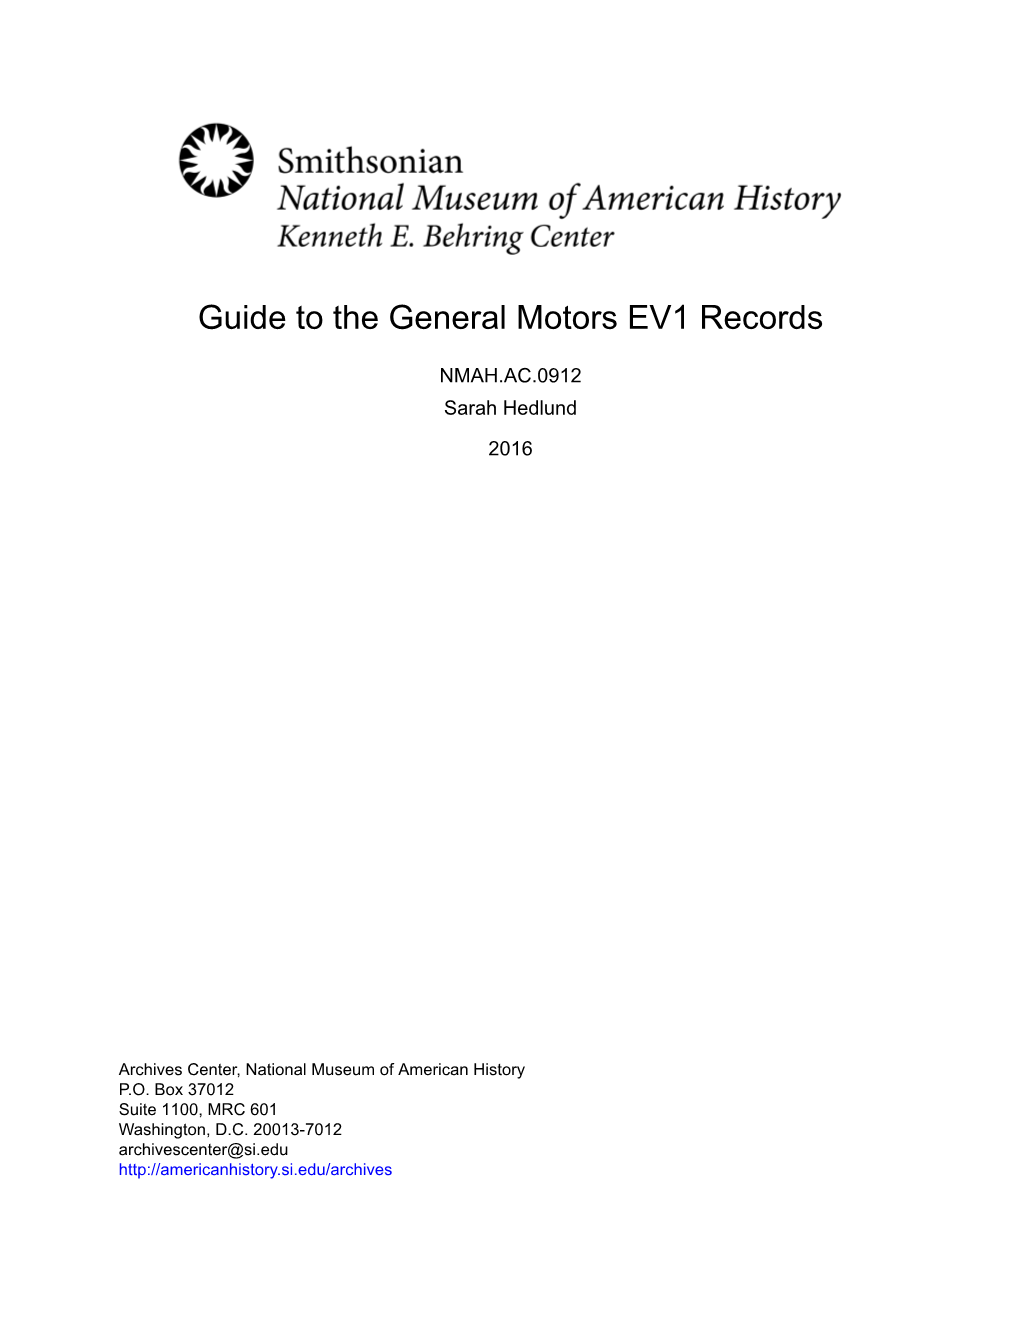 Guide to the General Motors EV1 Records